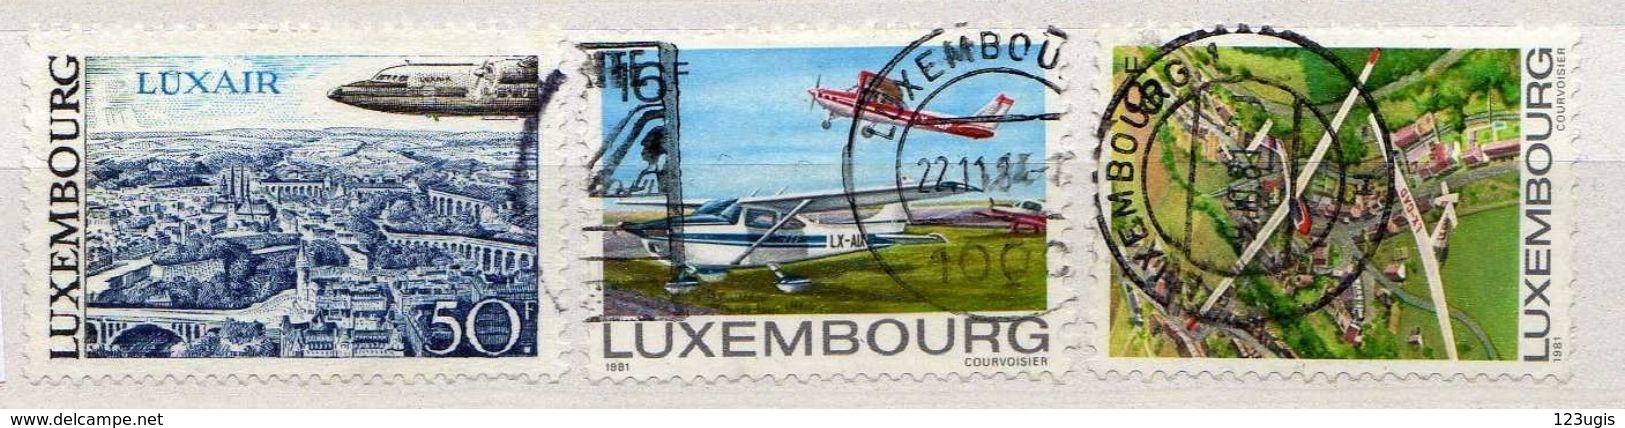 Luxemburg Lot, Gestempelt, Flugpost / Flugzeug / Air Mail / Planes [170717XXI] - Used Stamps